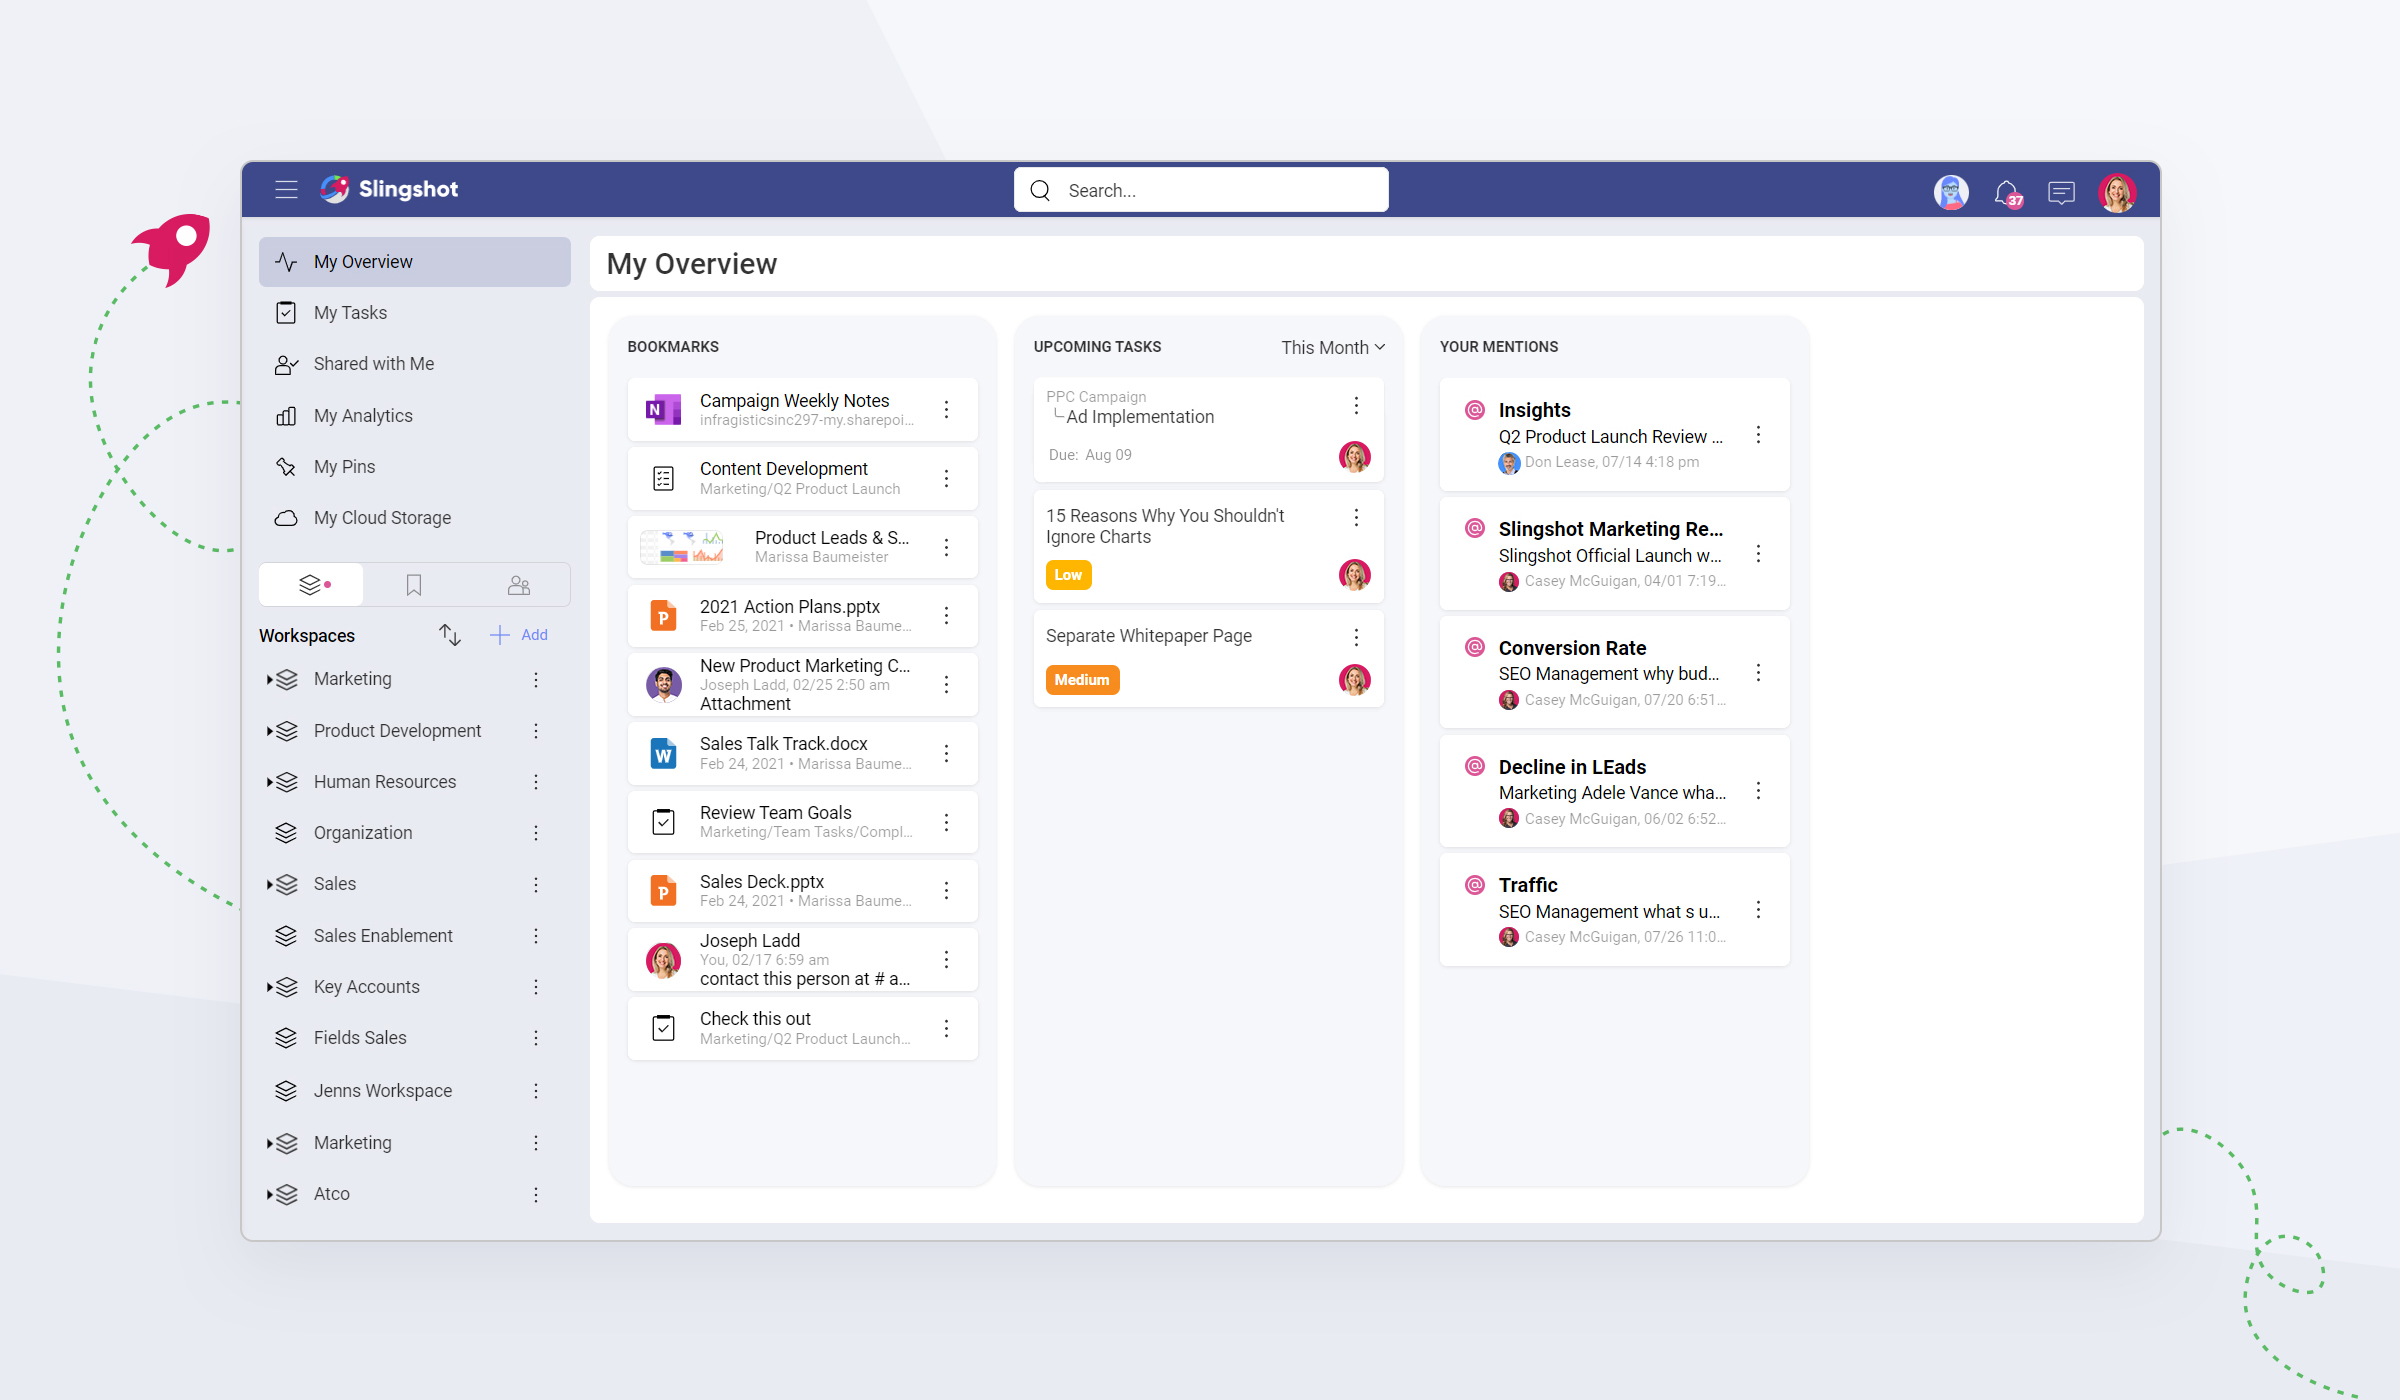 Easily manage, share and access files and documents with your team in the same place collaboration happens.